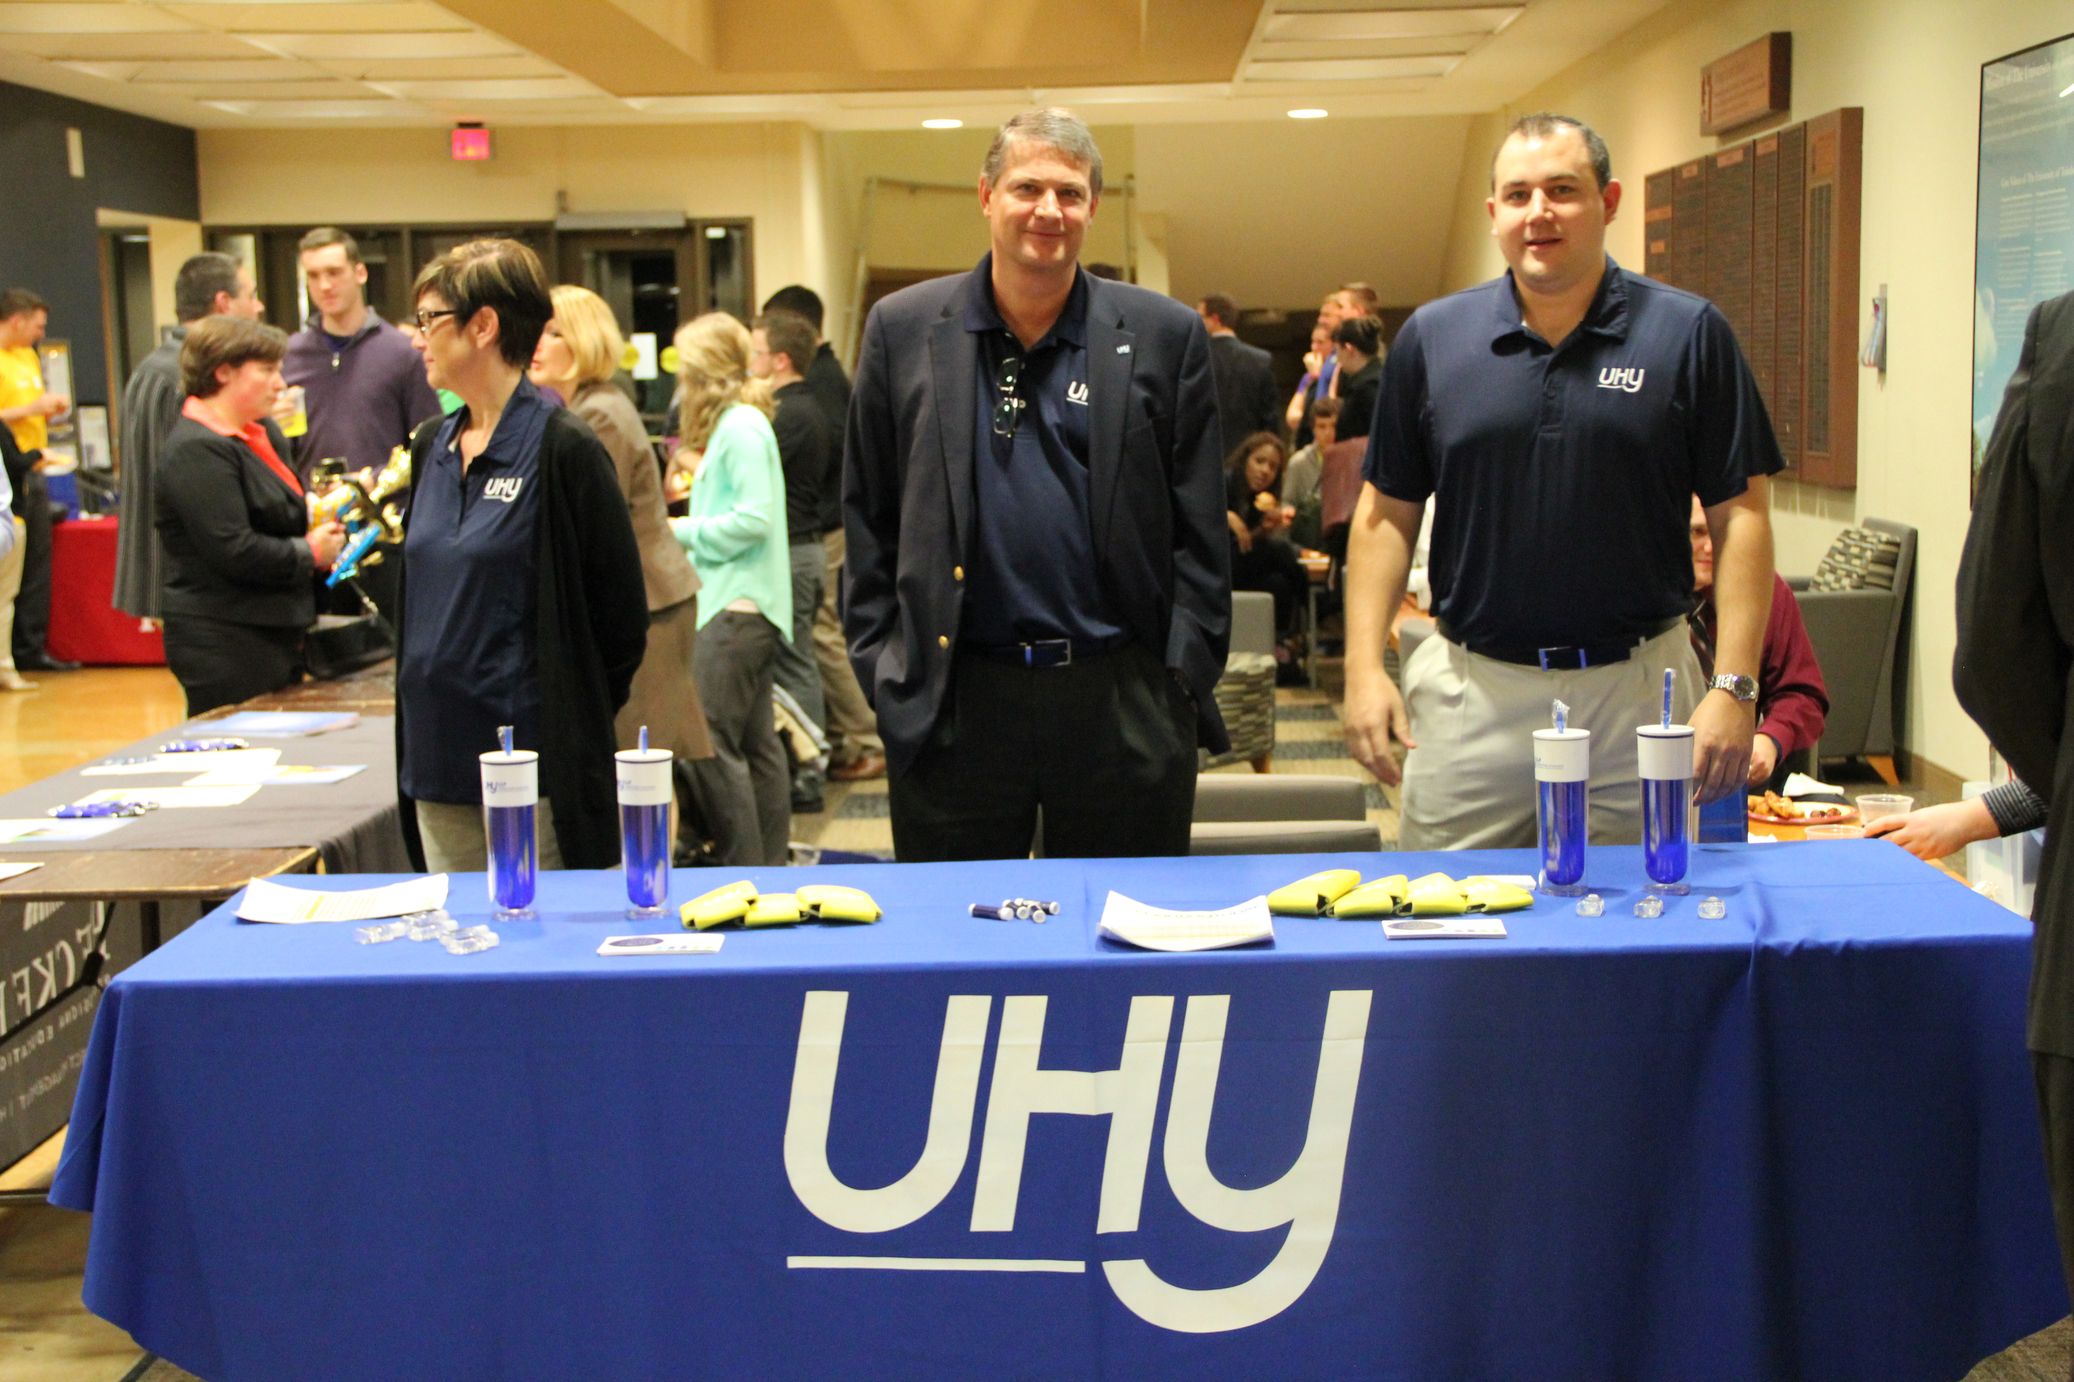 UT College of Business hosted Meet the Accountants program